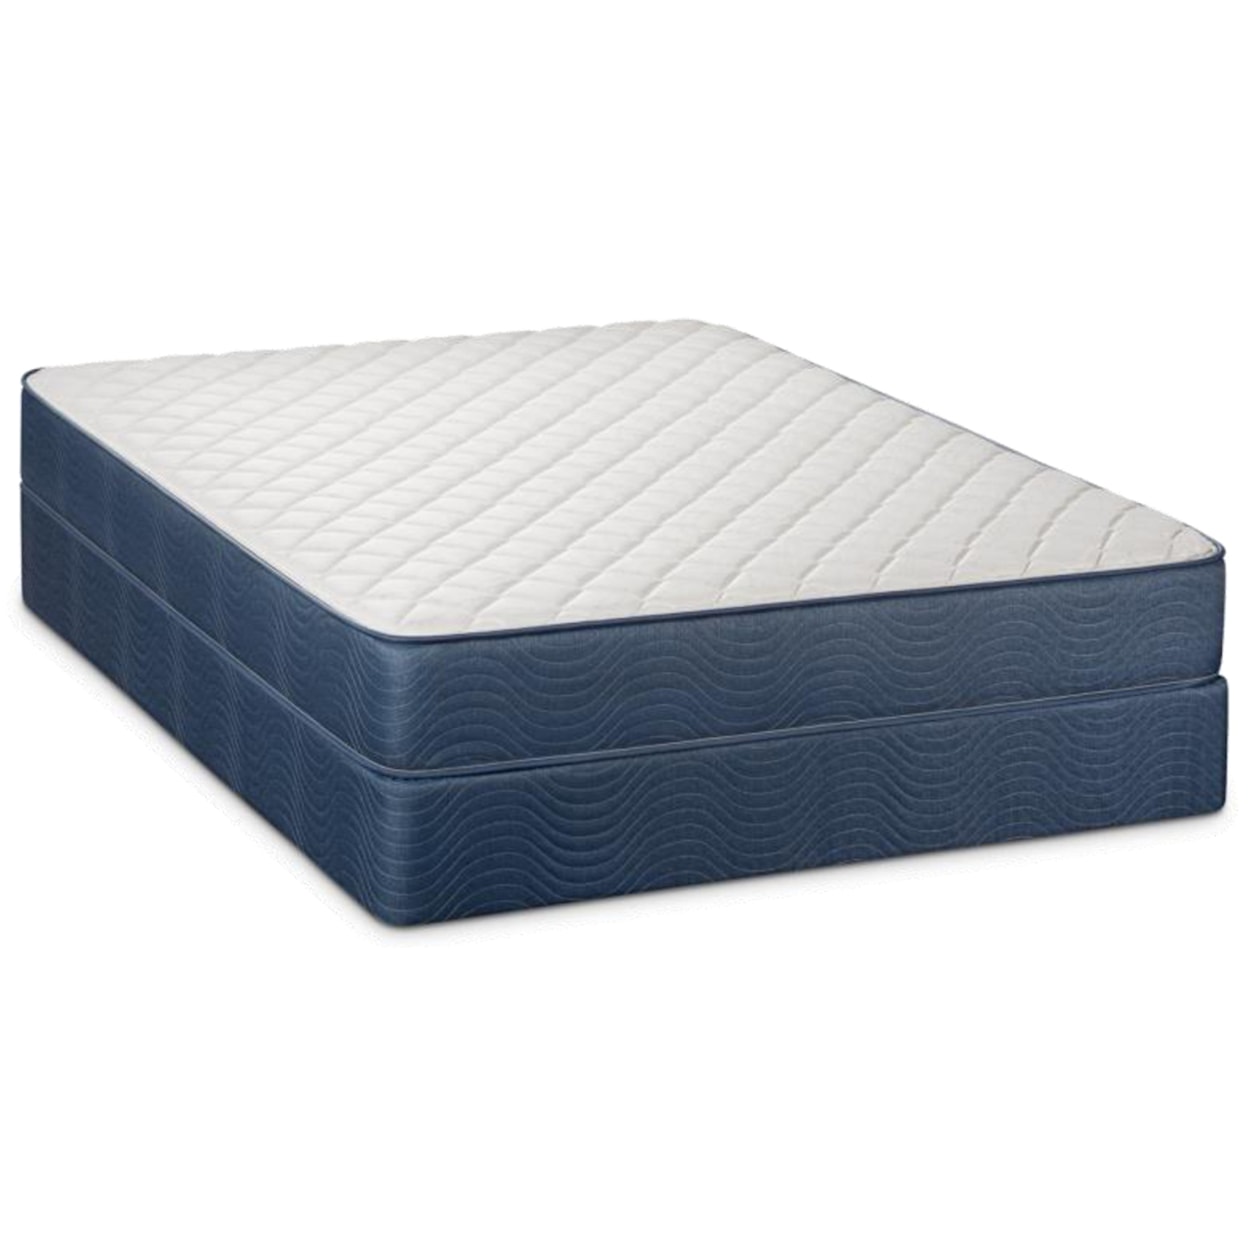 Restonic Sumner Firm King 9" Firm Two Sided Mattress Set